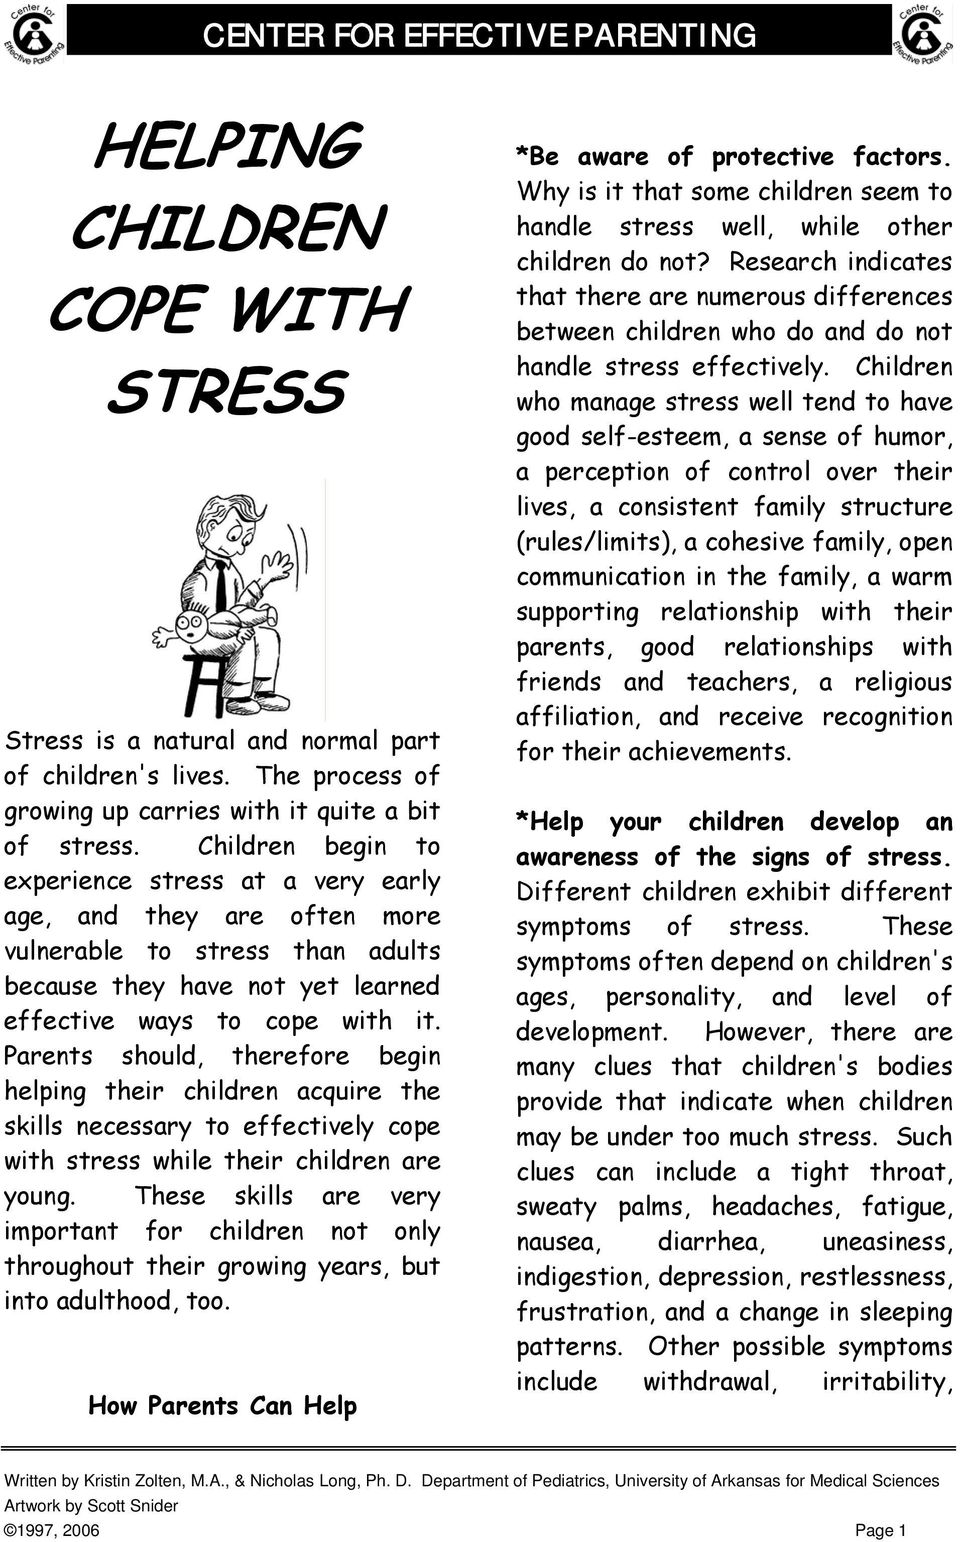 Parents should, therefore begin helping their children acquire the skills necessary to effectively cope with stress while their children are young.